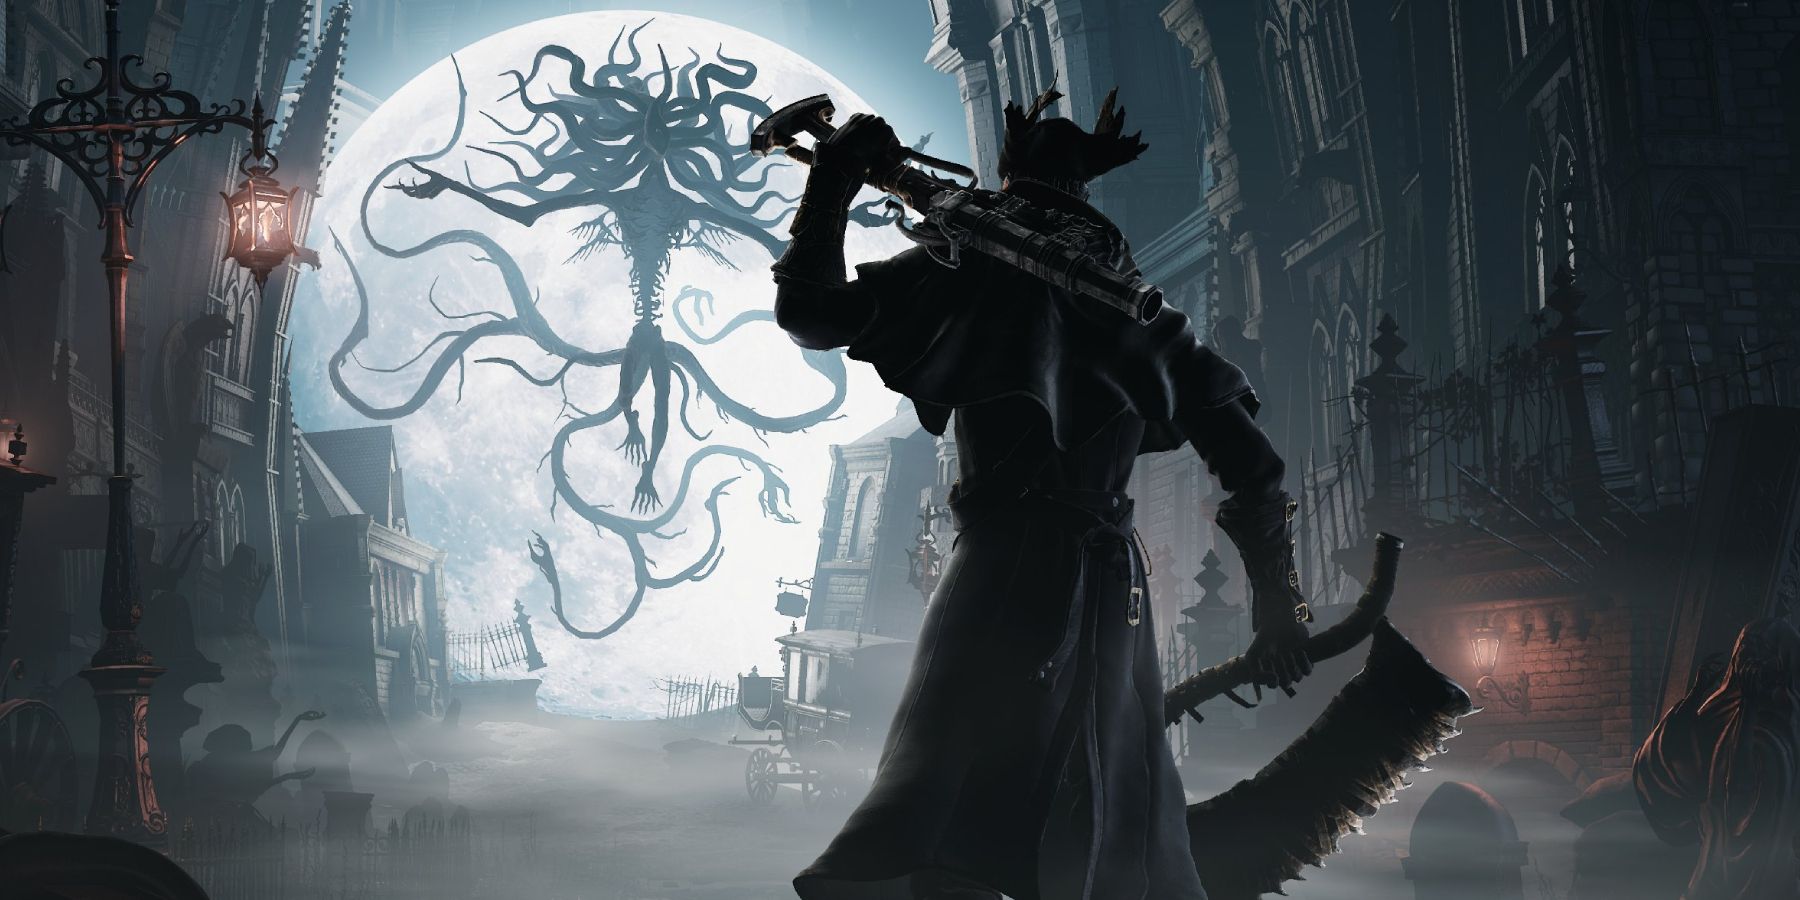 Rumors mount a Bloodborne remaster is coming to PC